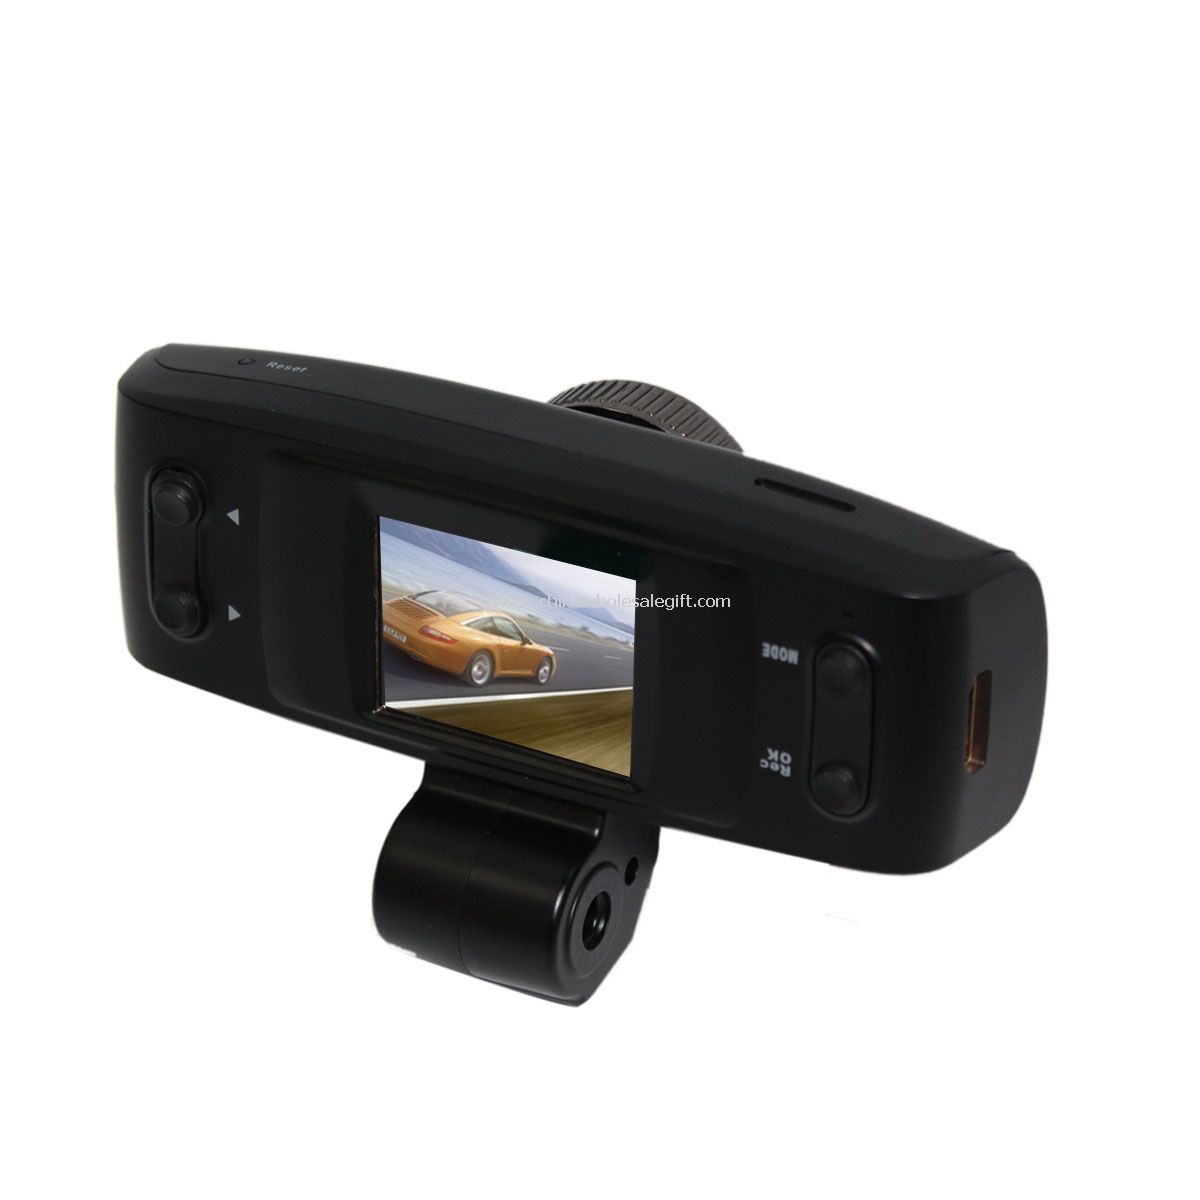 High definition 1080p video camcorder GPS with screen